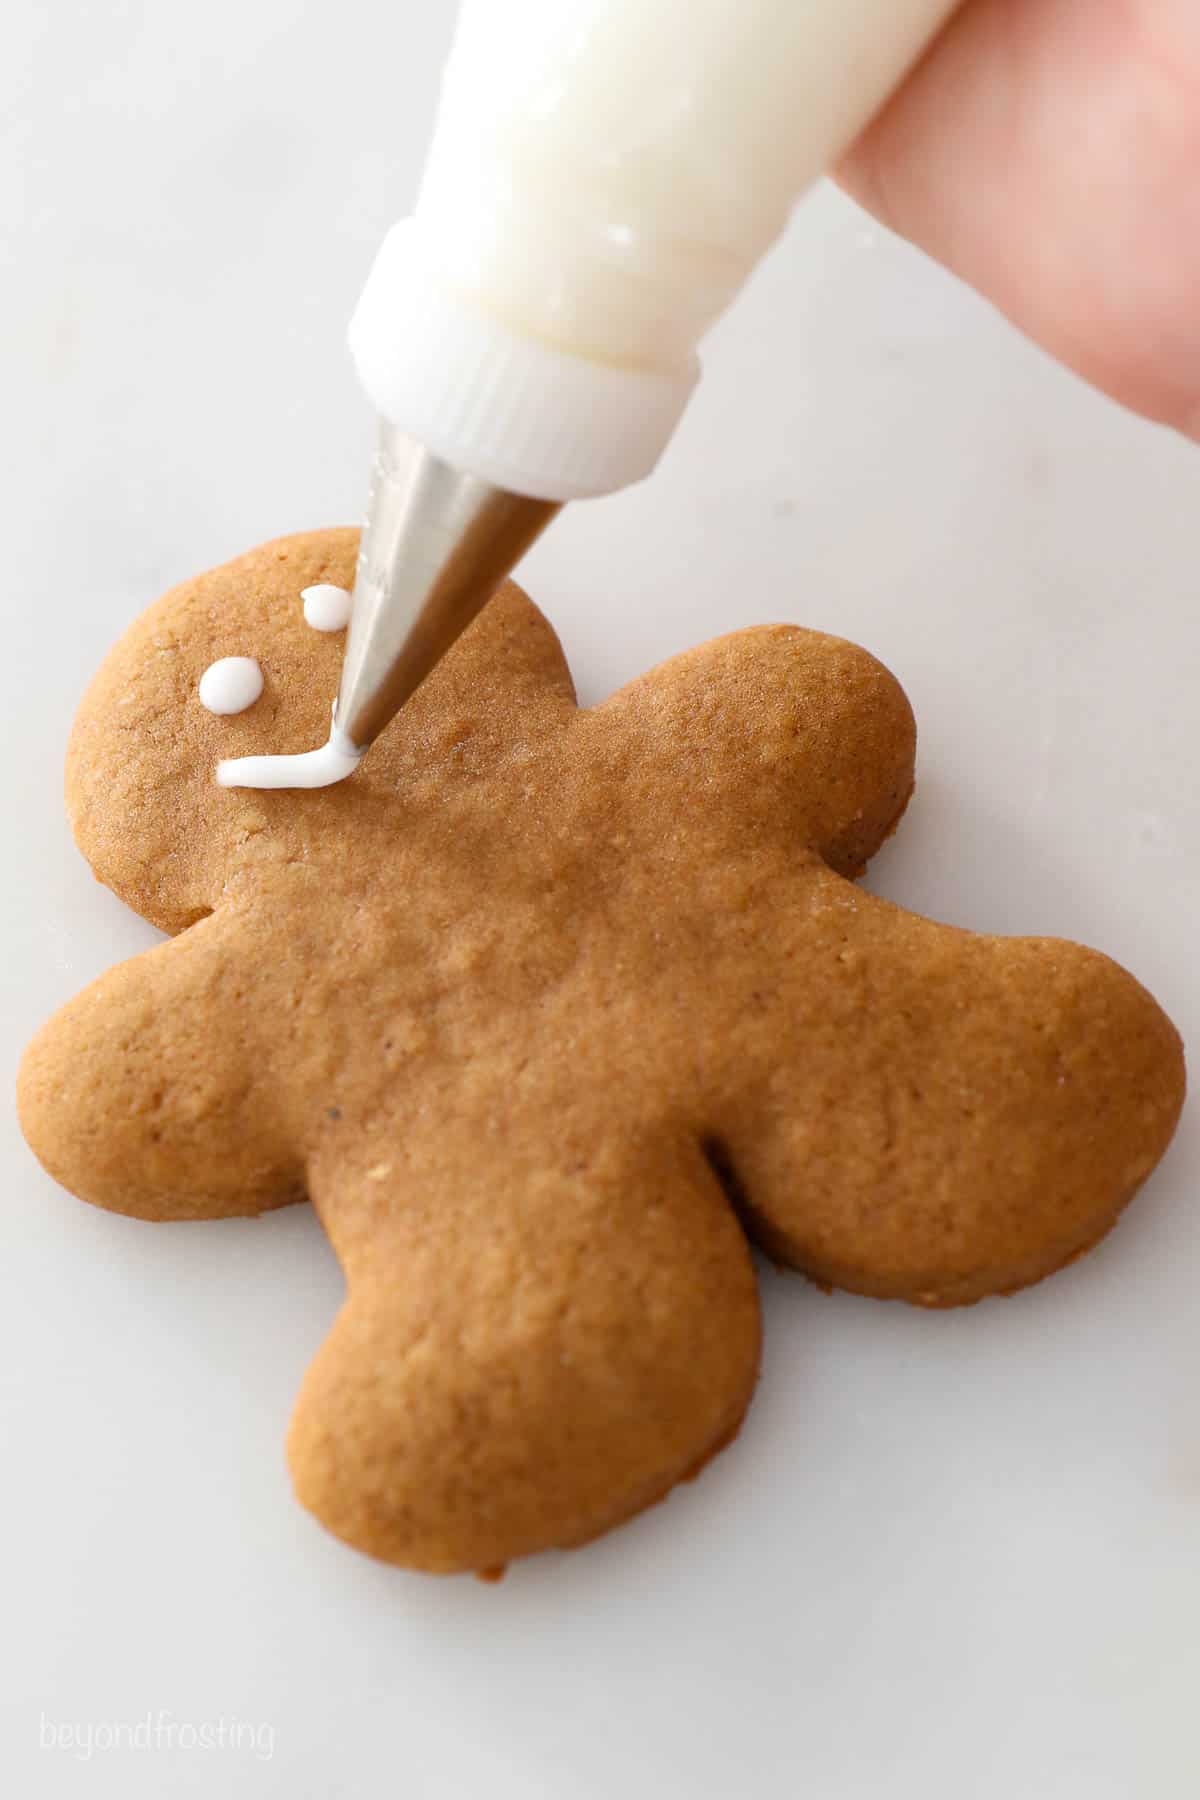 Icing being used to pipe a smiling face onto a homemade gingerbread cookie